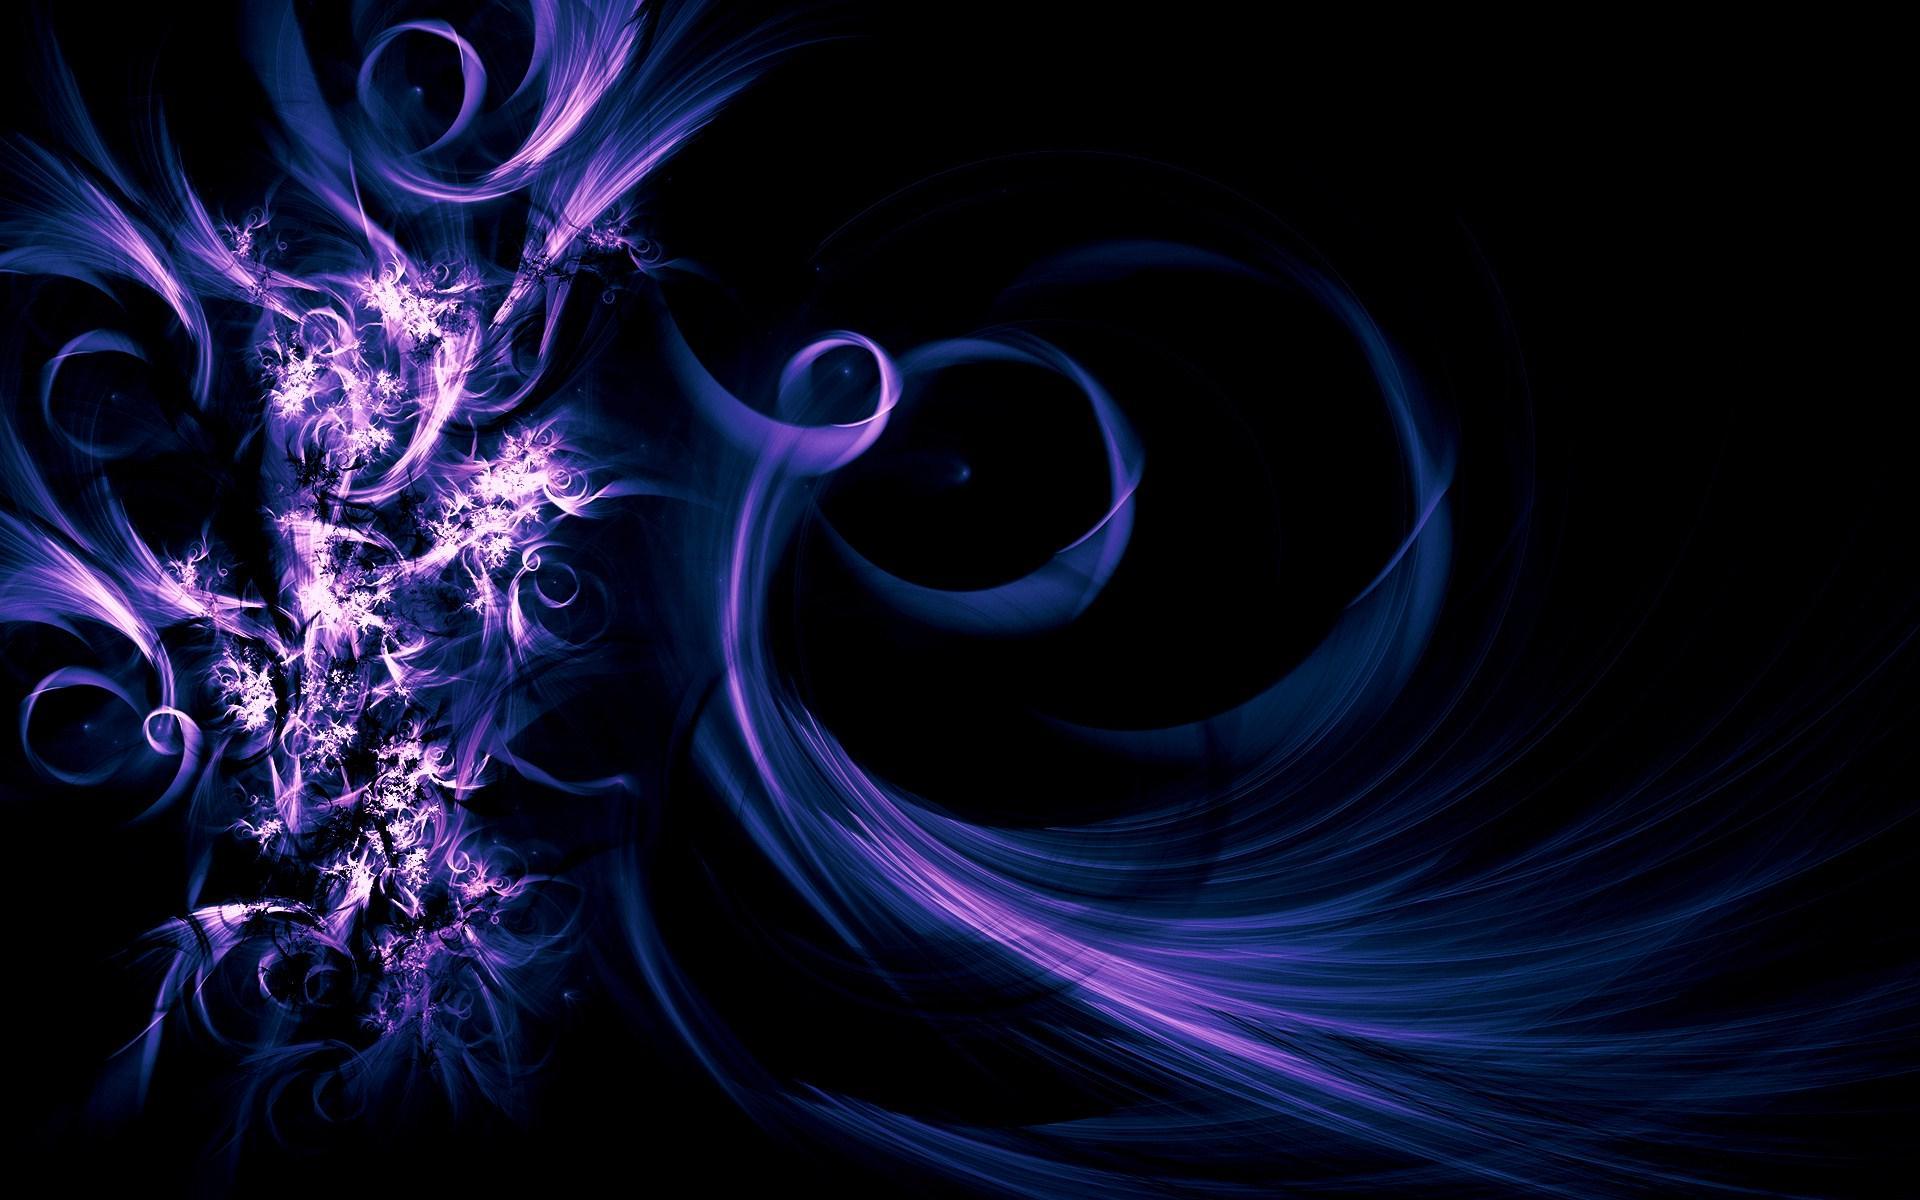 Purple Abstract Art Wallpapers - Top Free Purple Abstract Art